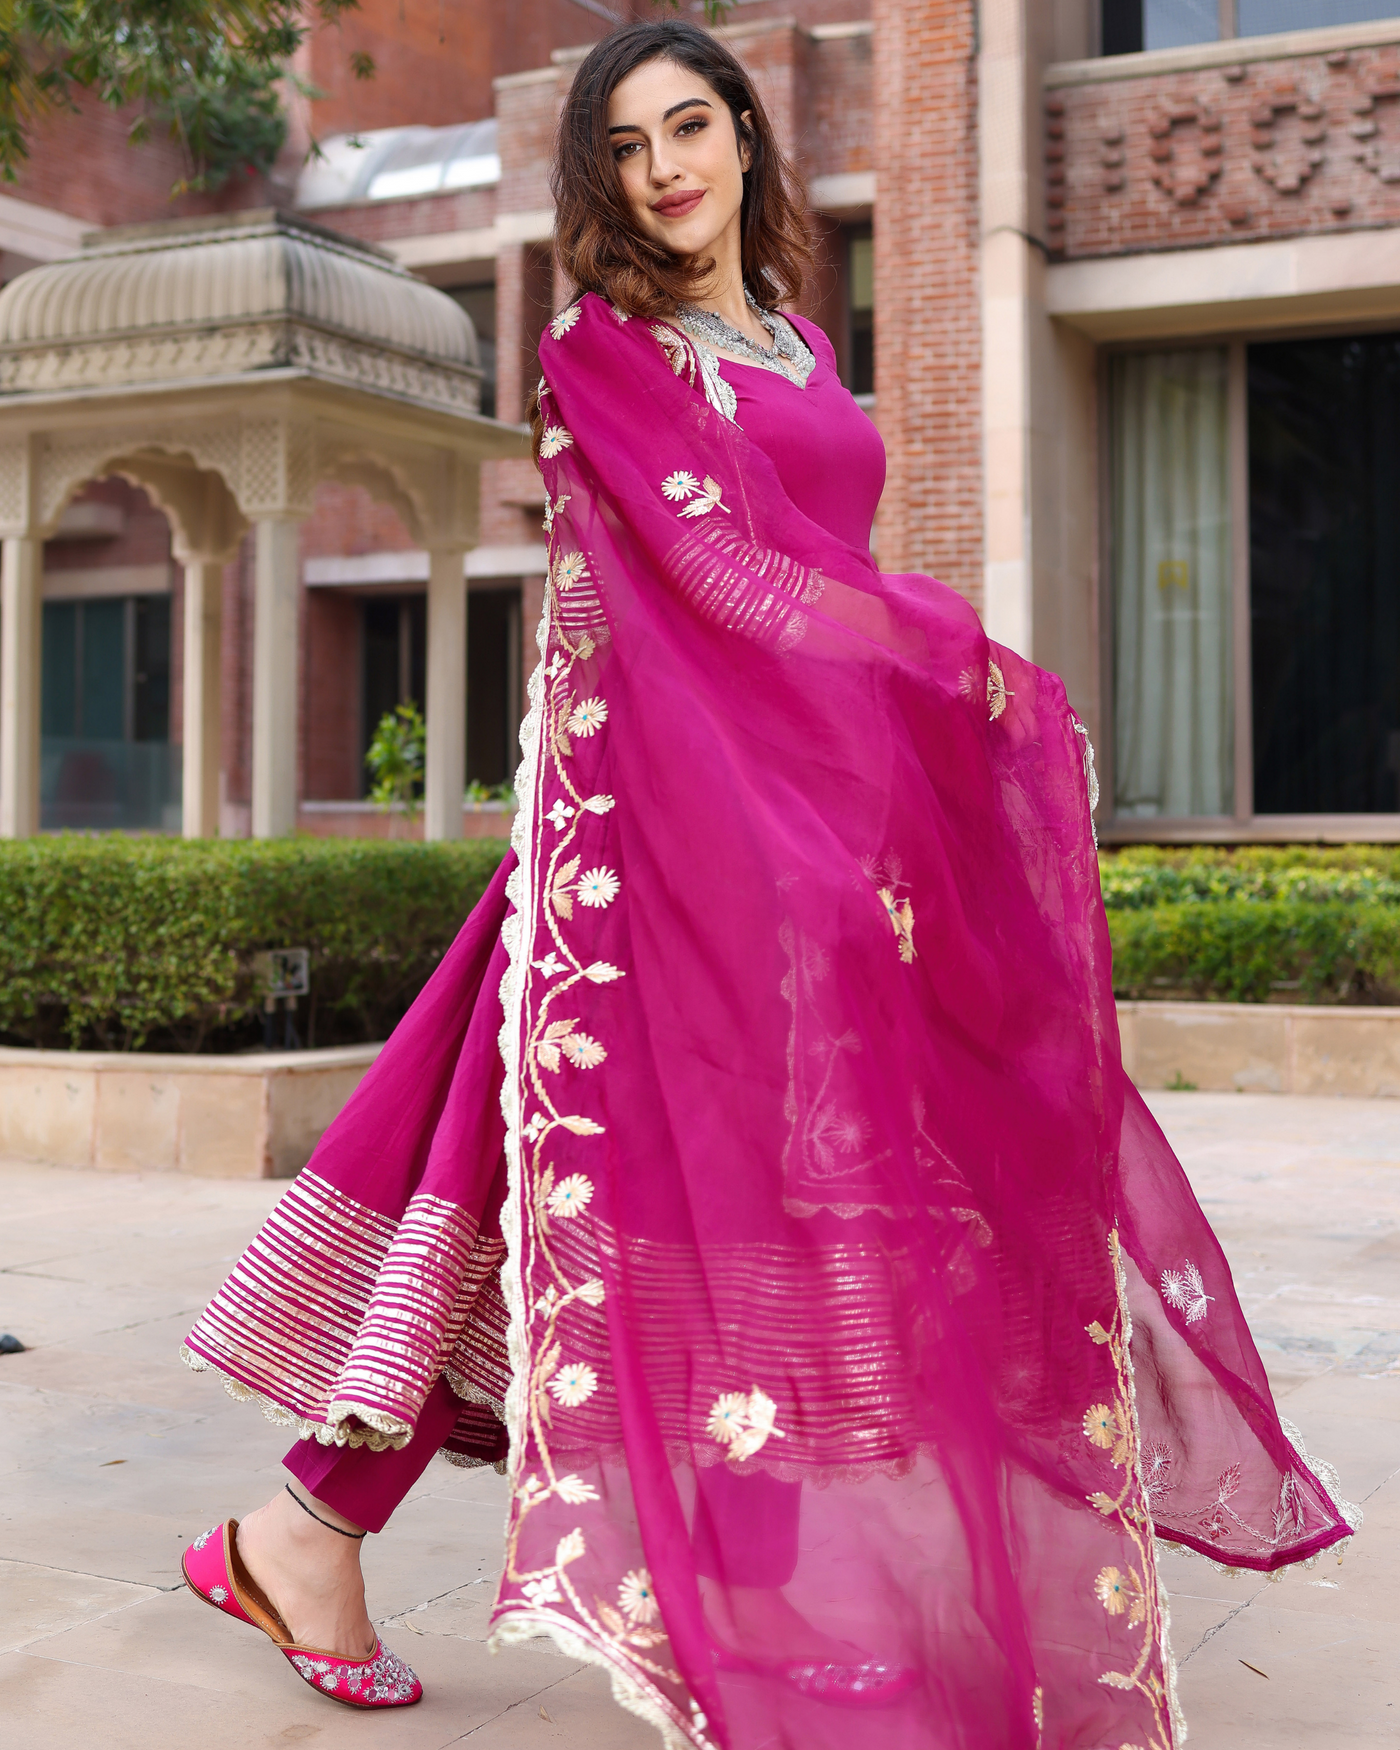 Buy Sparkling Purple Gotapatti Suit Set online in India at Best Price